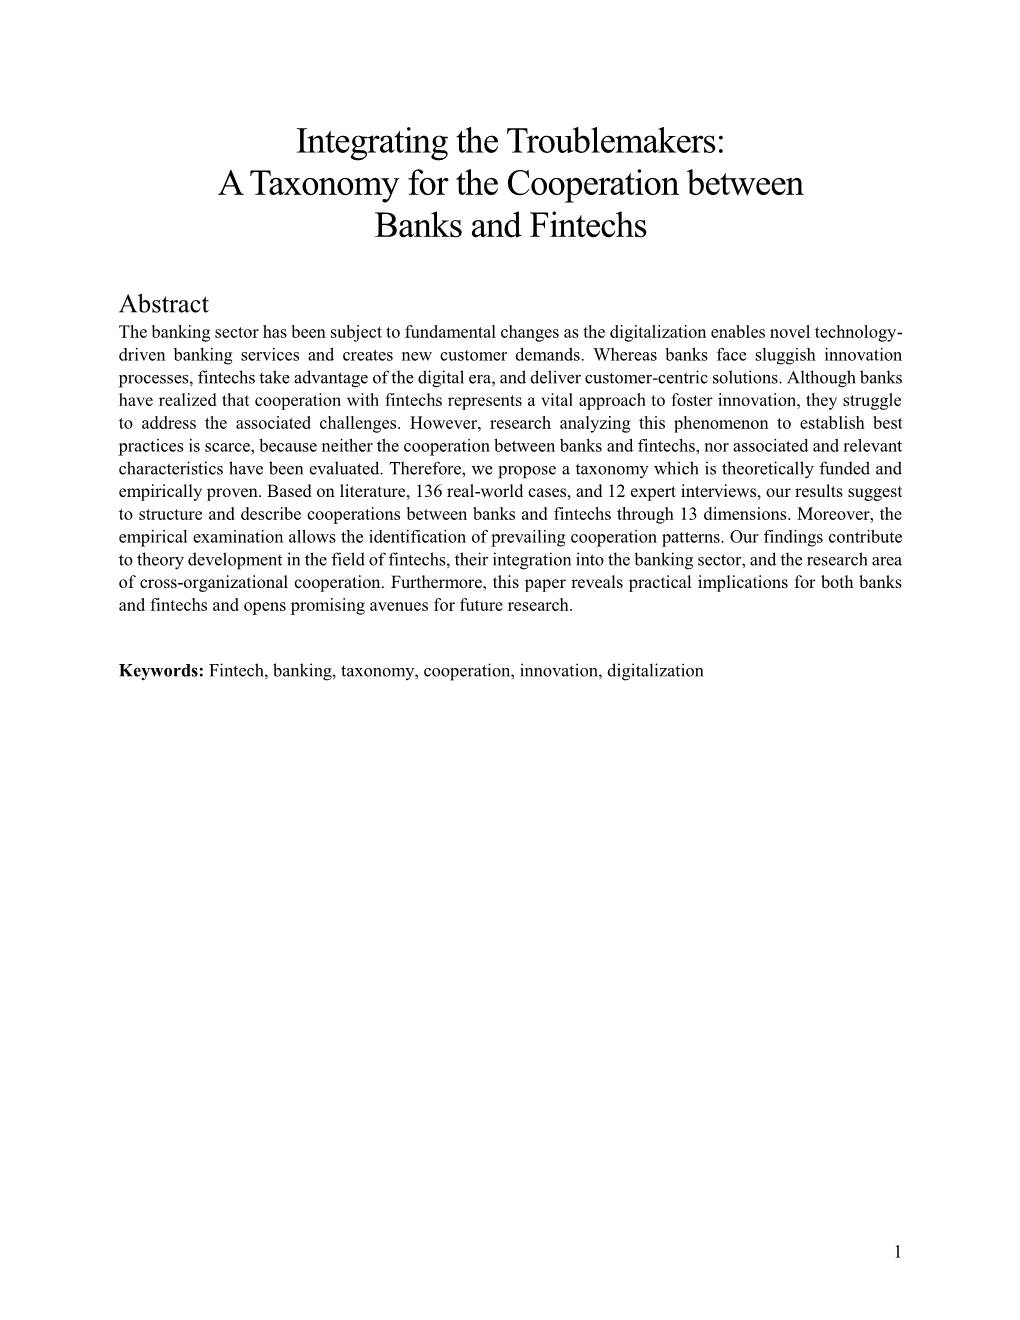 Integrating the Troublemakers: a Taxonomy for the Cooperation Between Banks and Fintechs